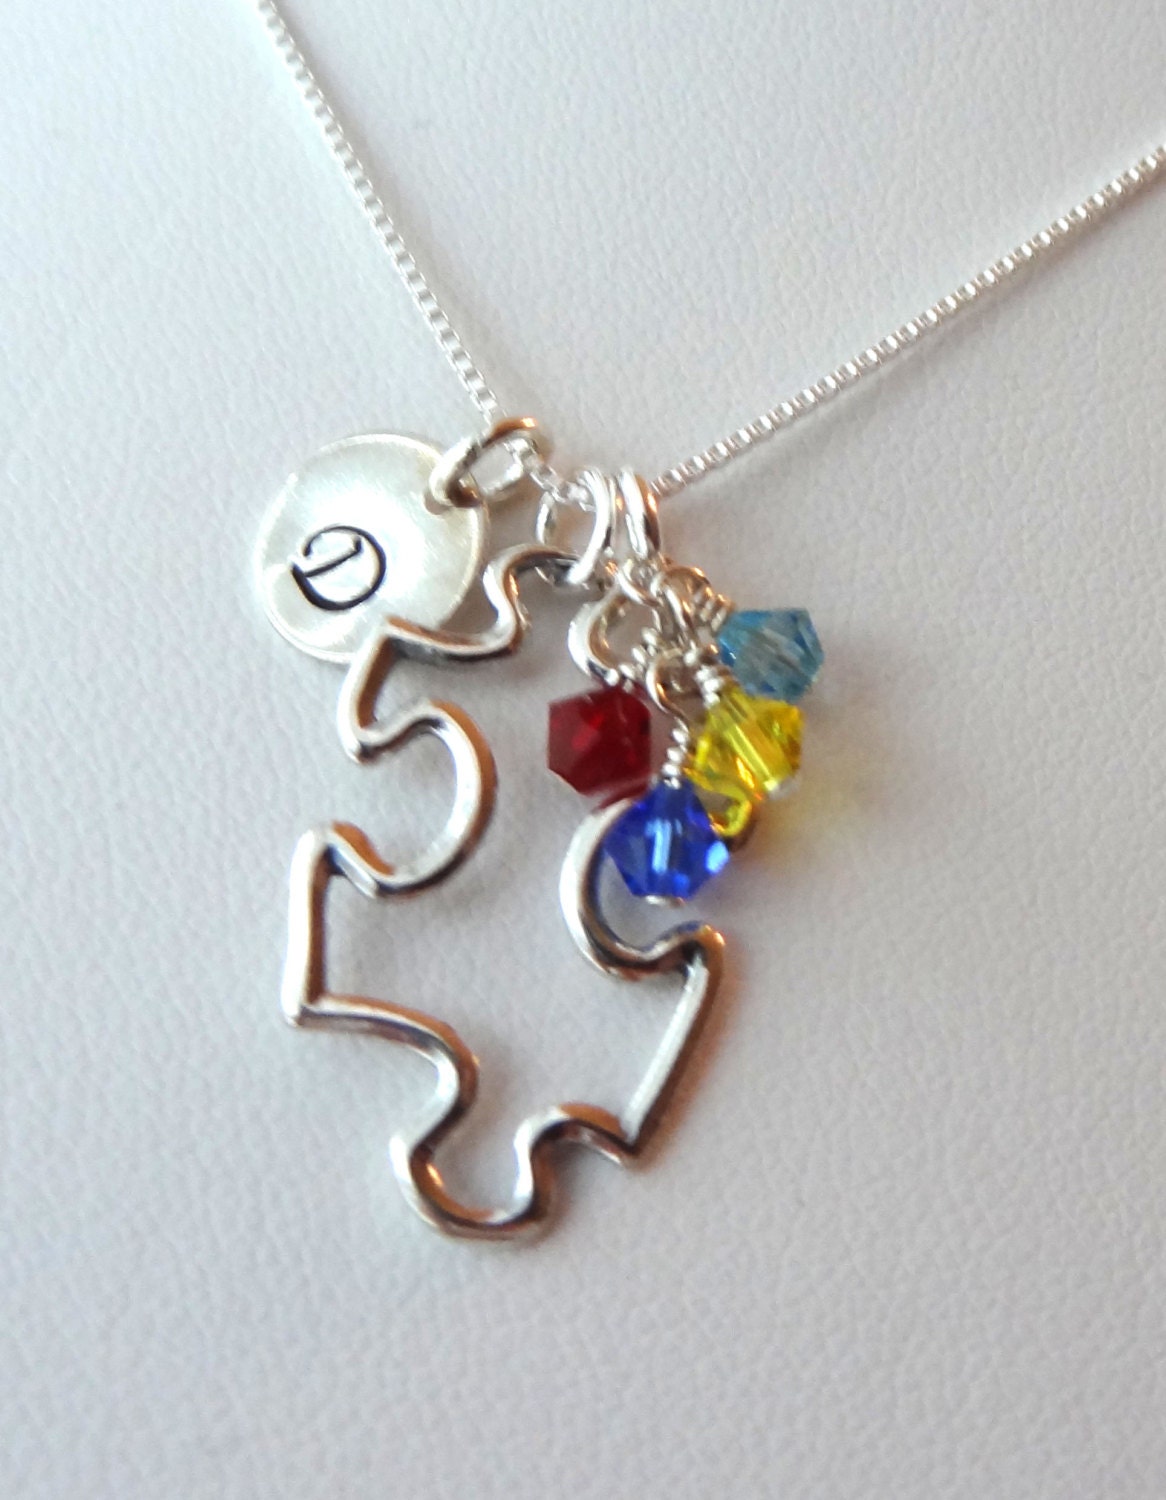 Sterling Silver Personalized Puzzle Initial Necklace,Multicolor Puzzle Jewelry,Autism Asperger Necklace,Autism Awareness,Sympathy Necklace